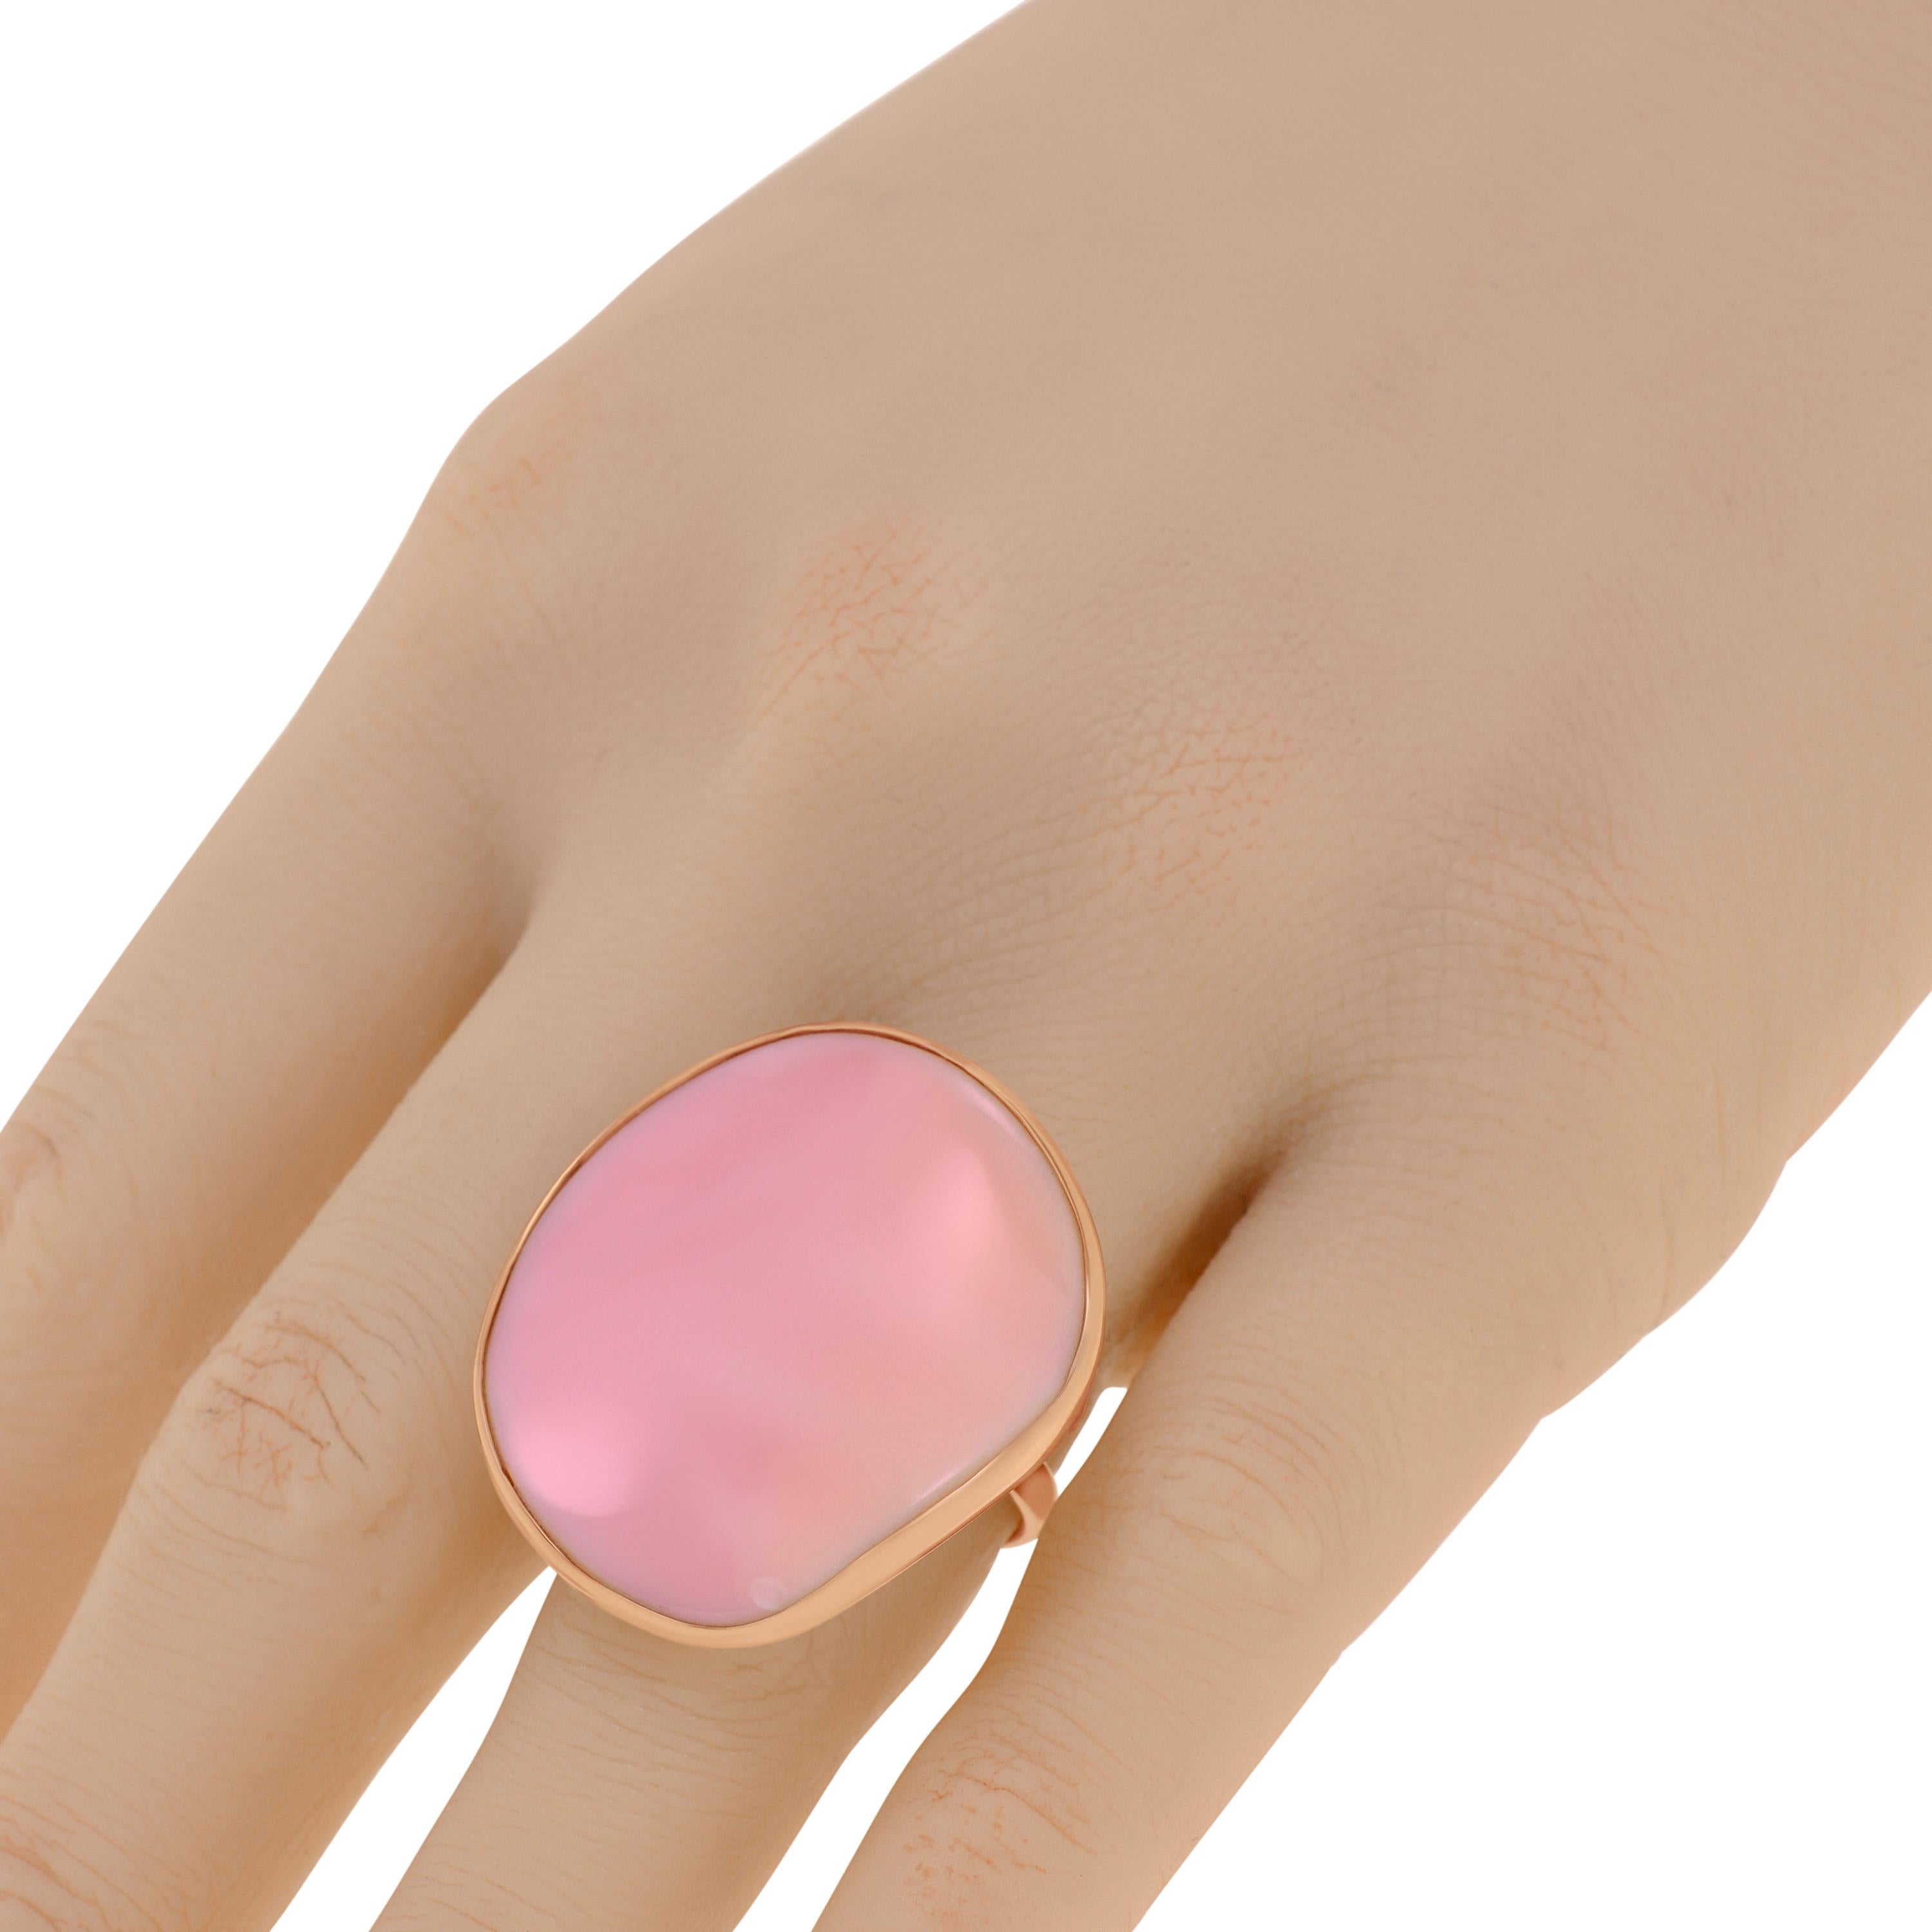 This stylish Mimi Milano 18K rose gold statement ring features pink Mother of pearl set in 18K rose gold. The ring size is 7.25 (55.1). The decoration size is 30.8mm. The weight is 8.7g.
